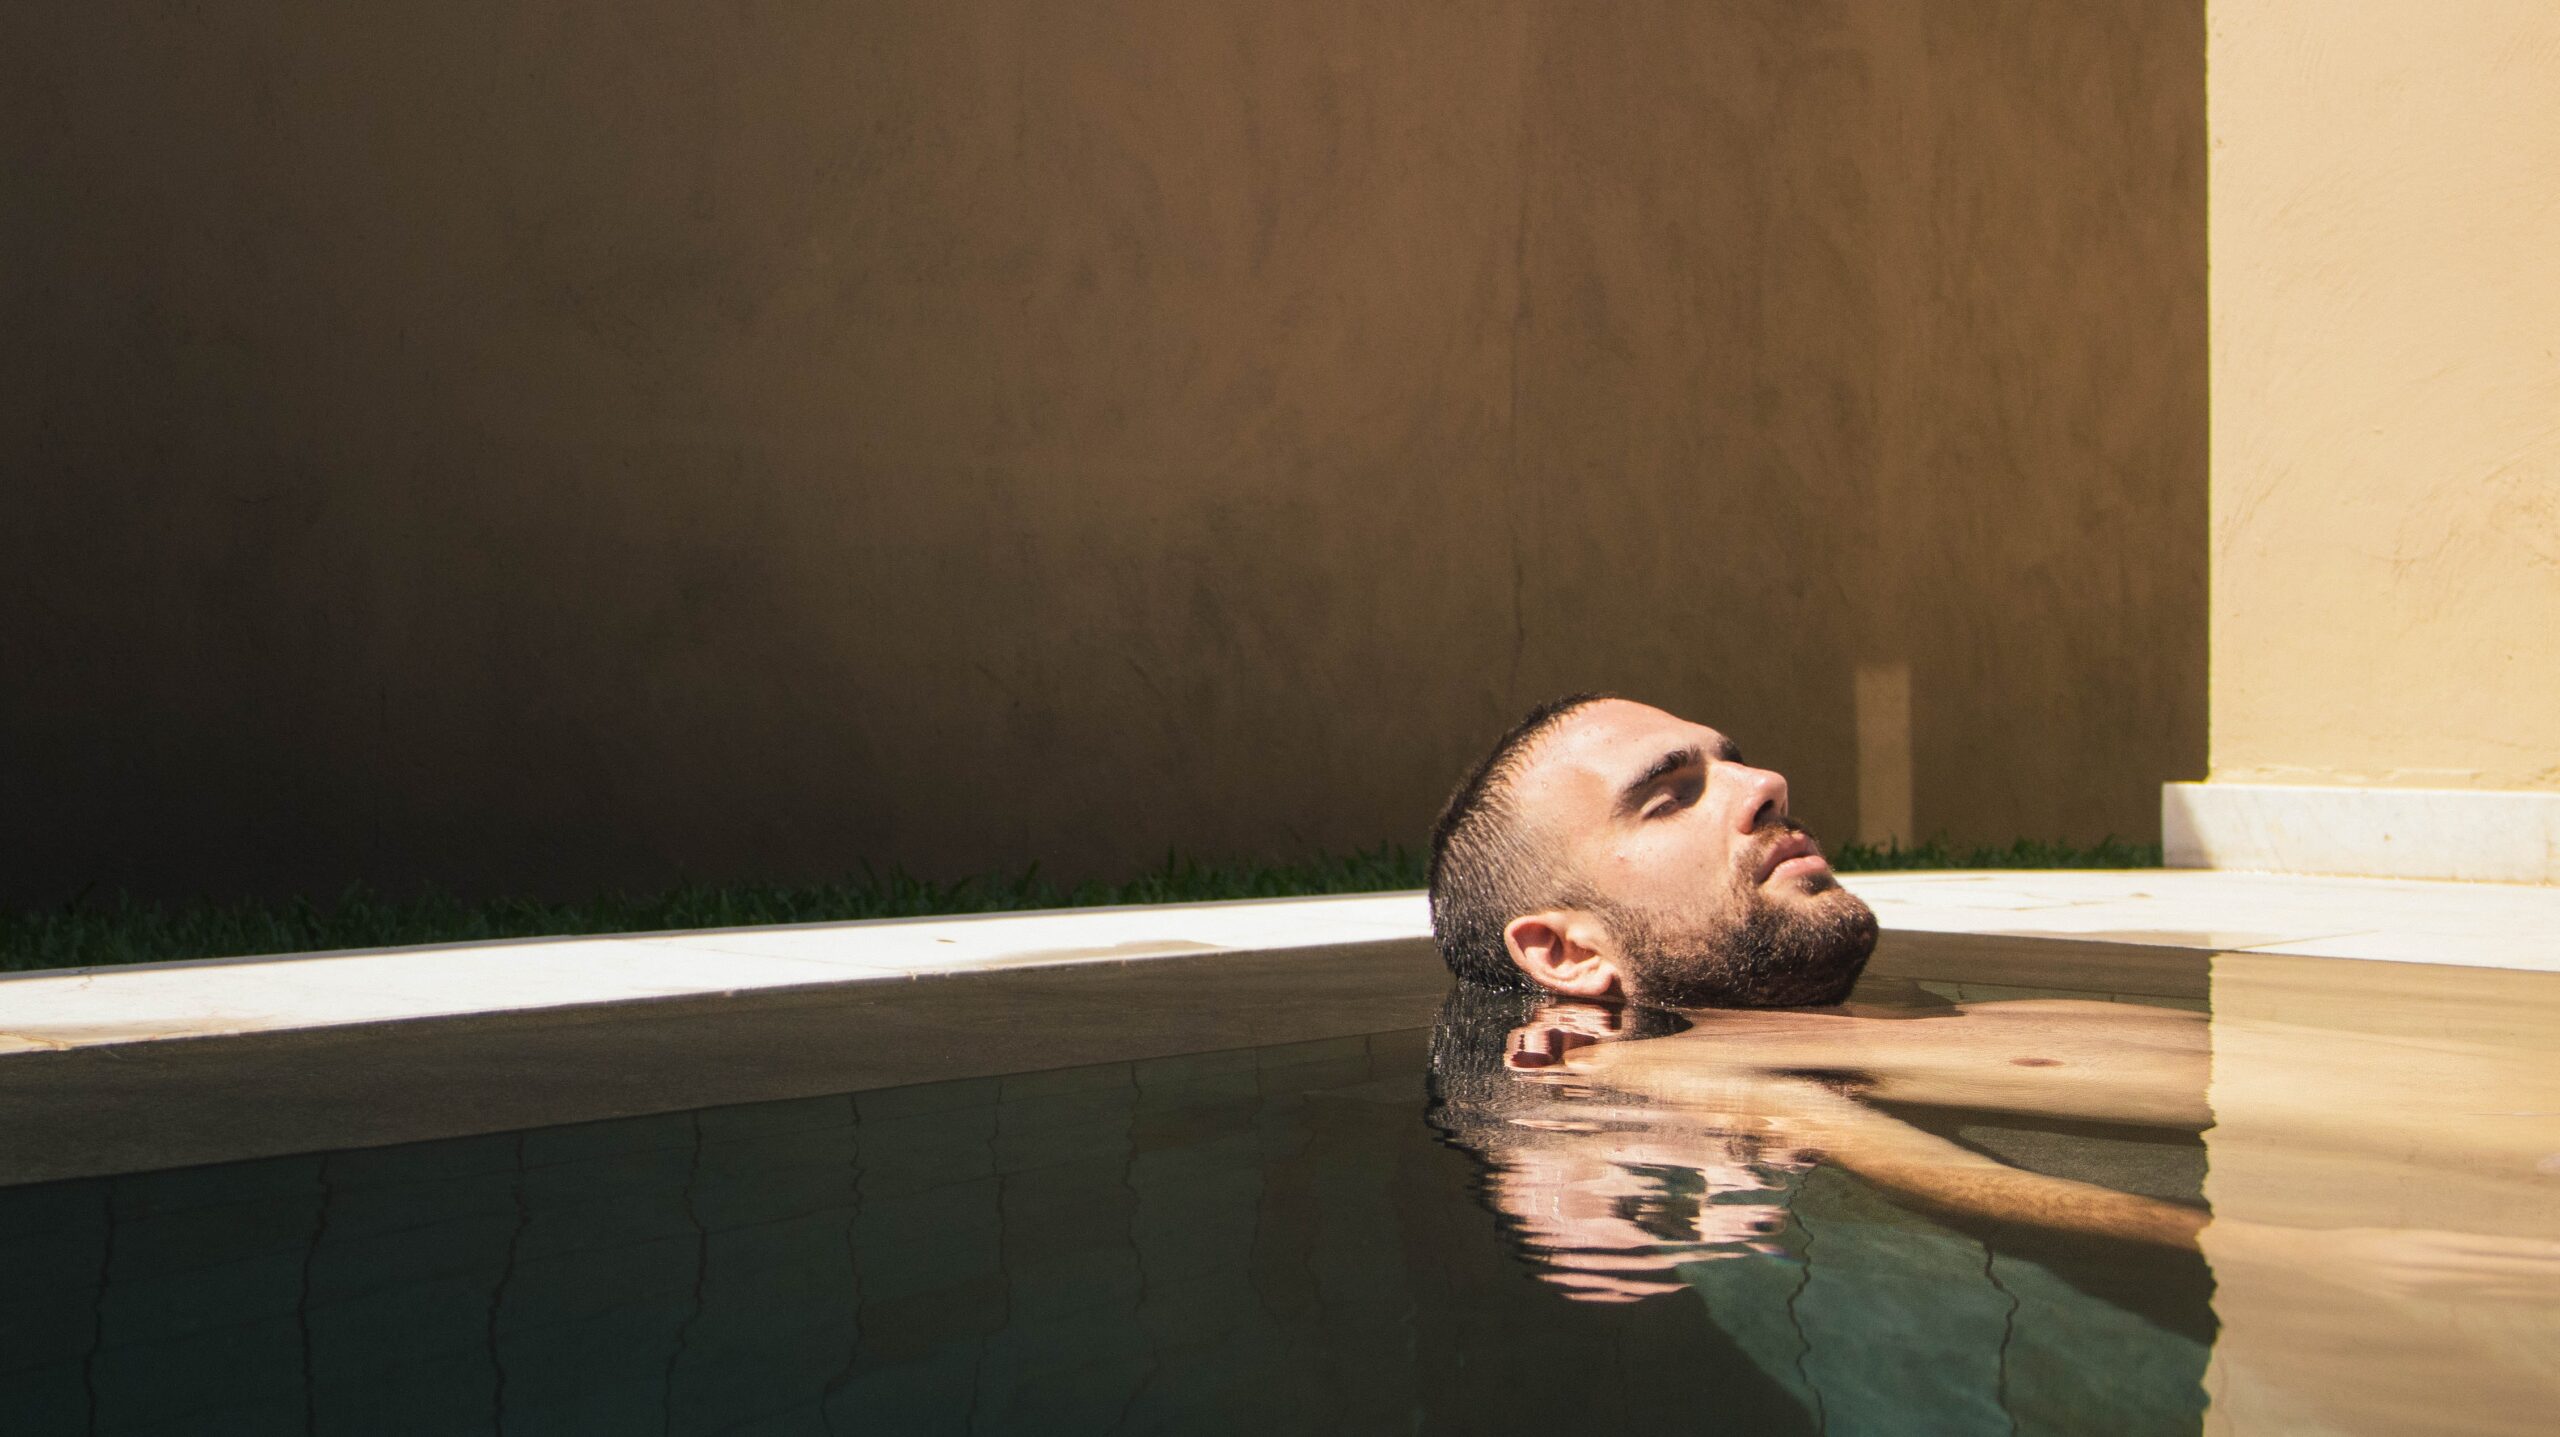 A man relaxes by laying still in a swimming pool